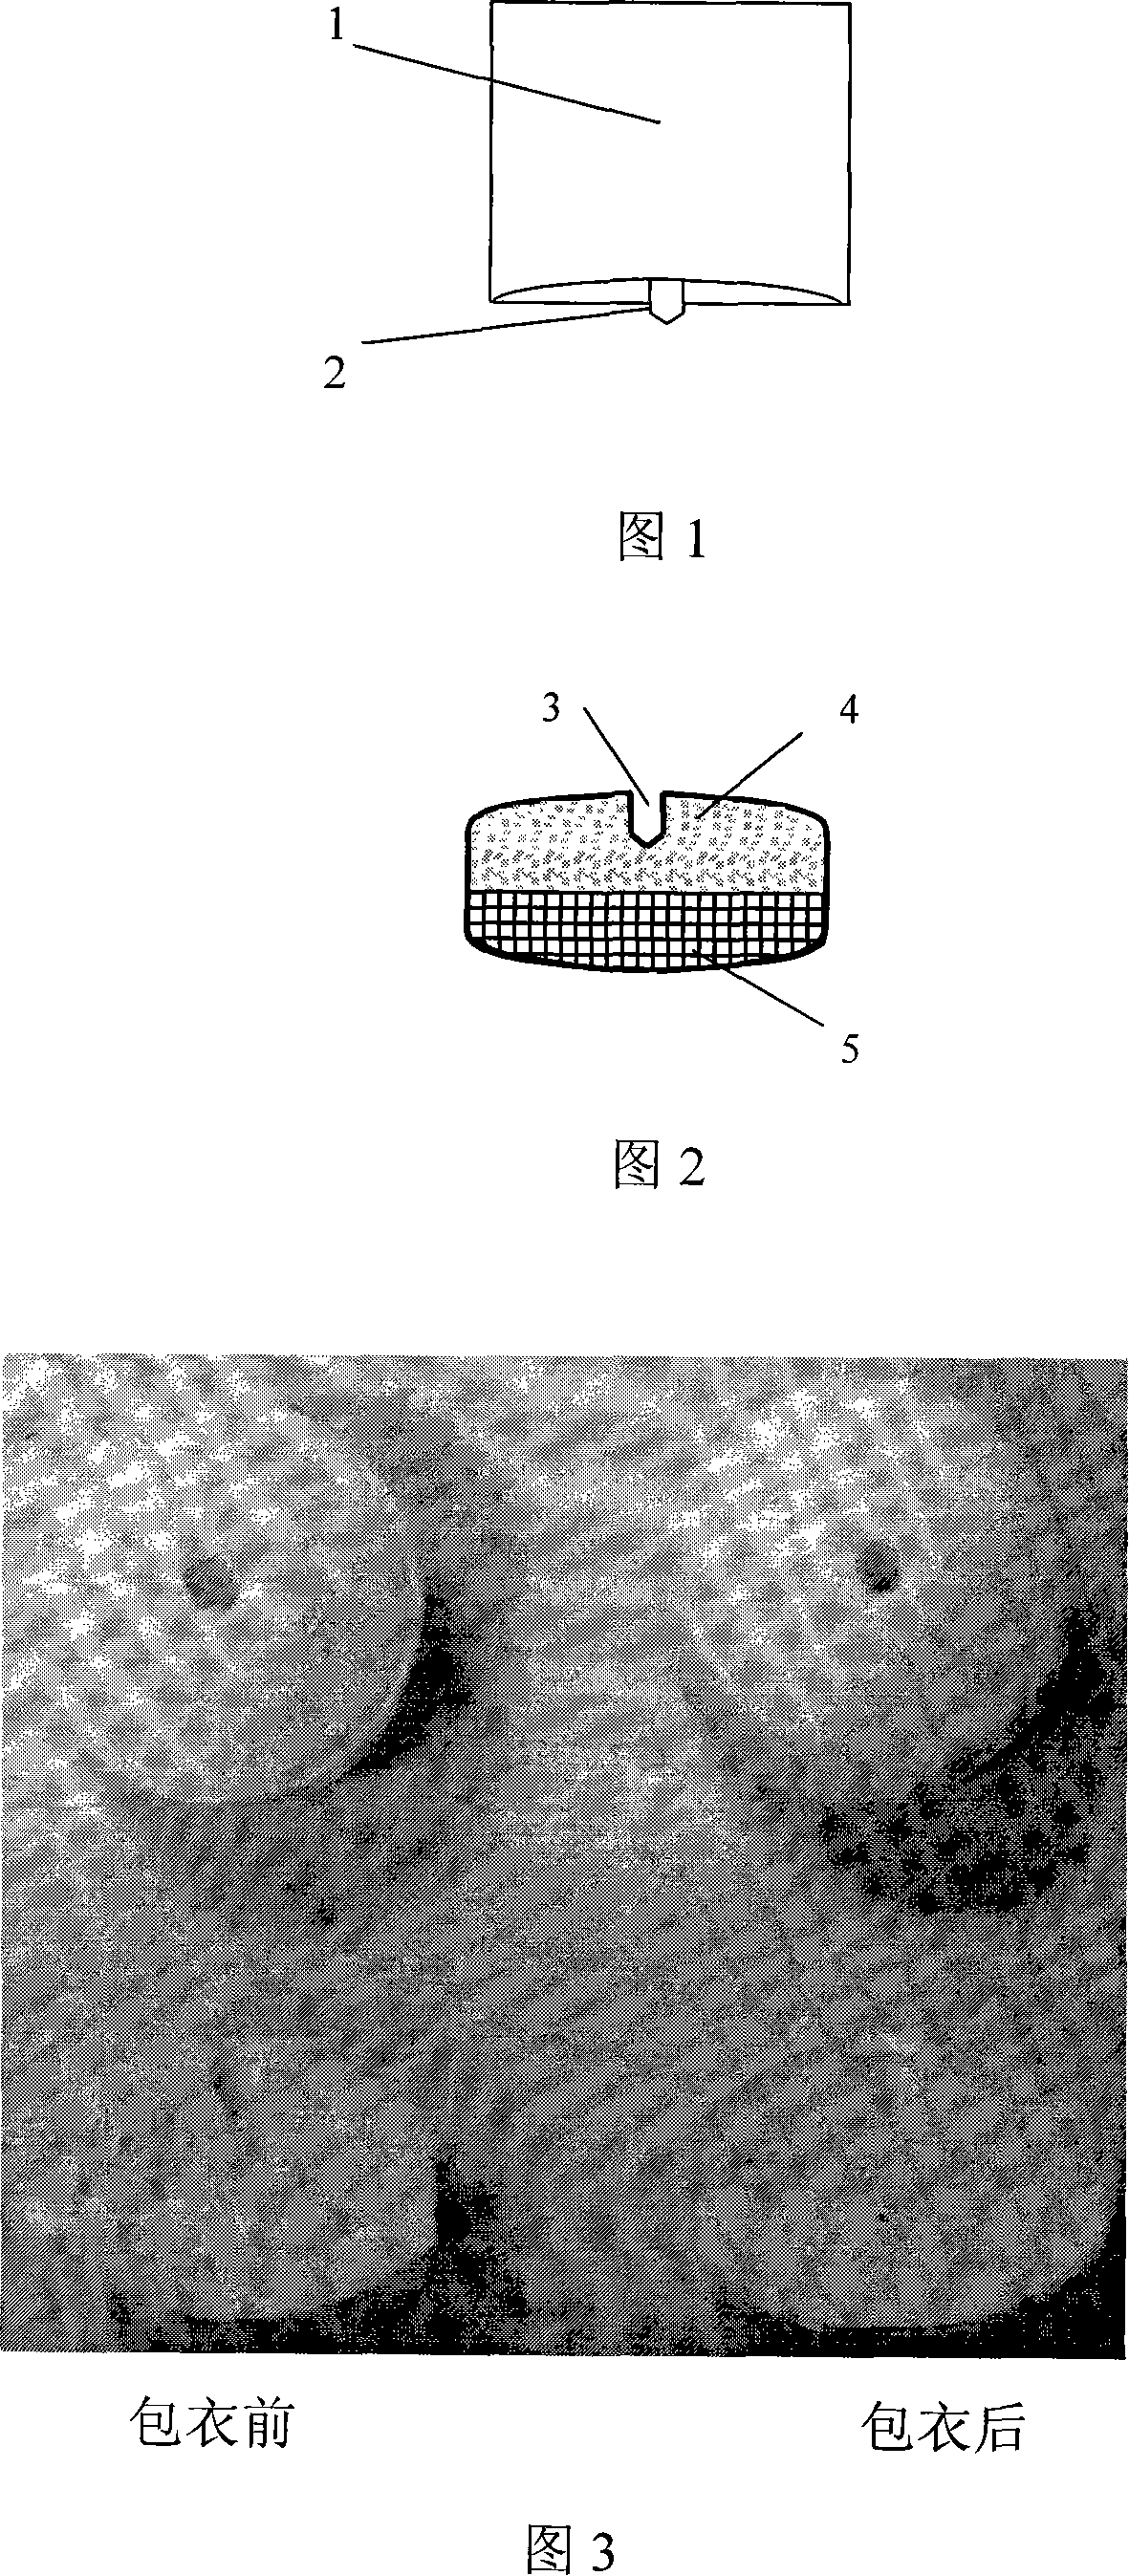 Method of producing double-layer core permeation pump patch of medicament